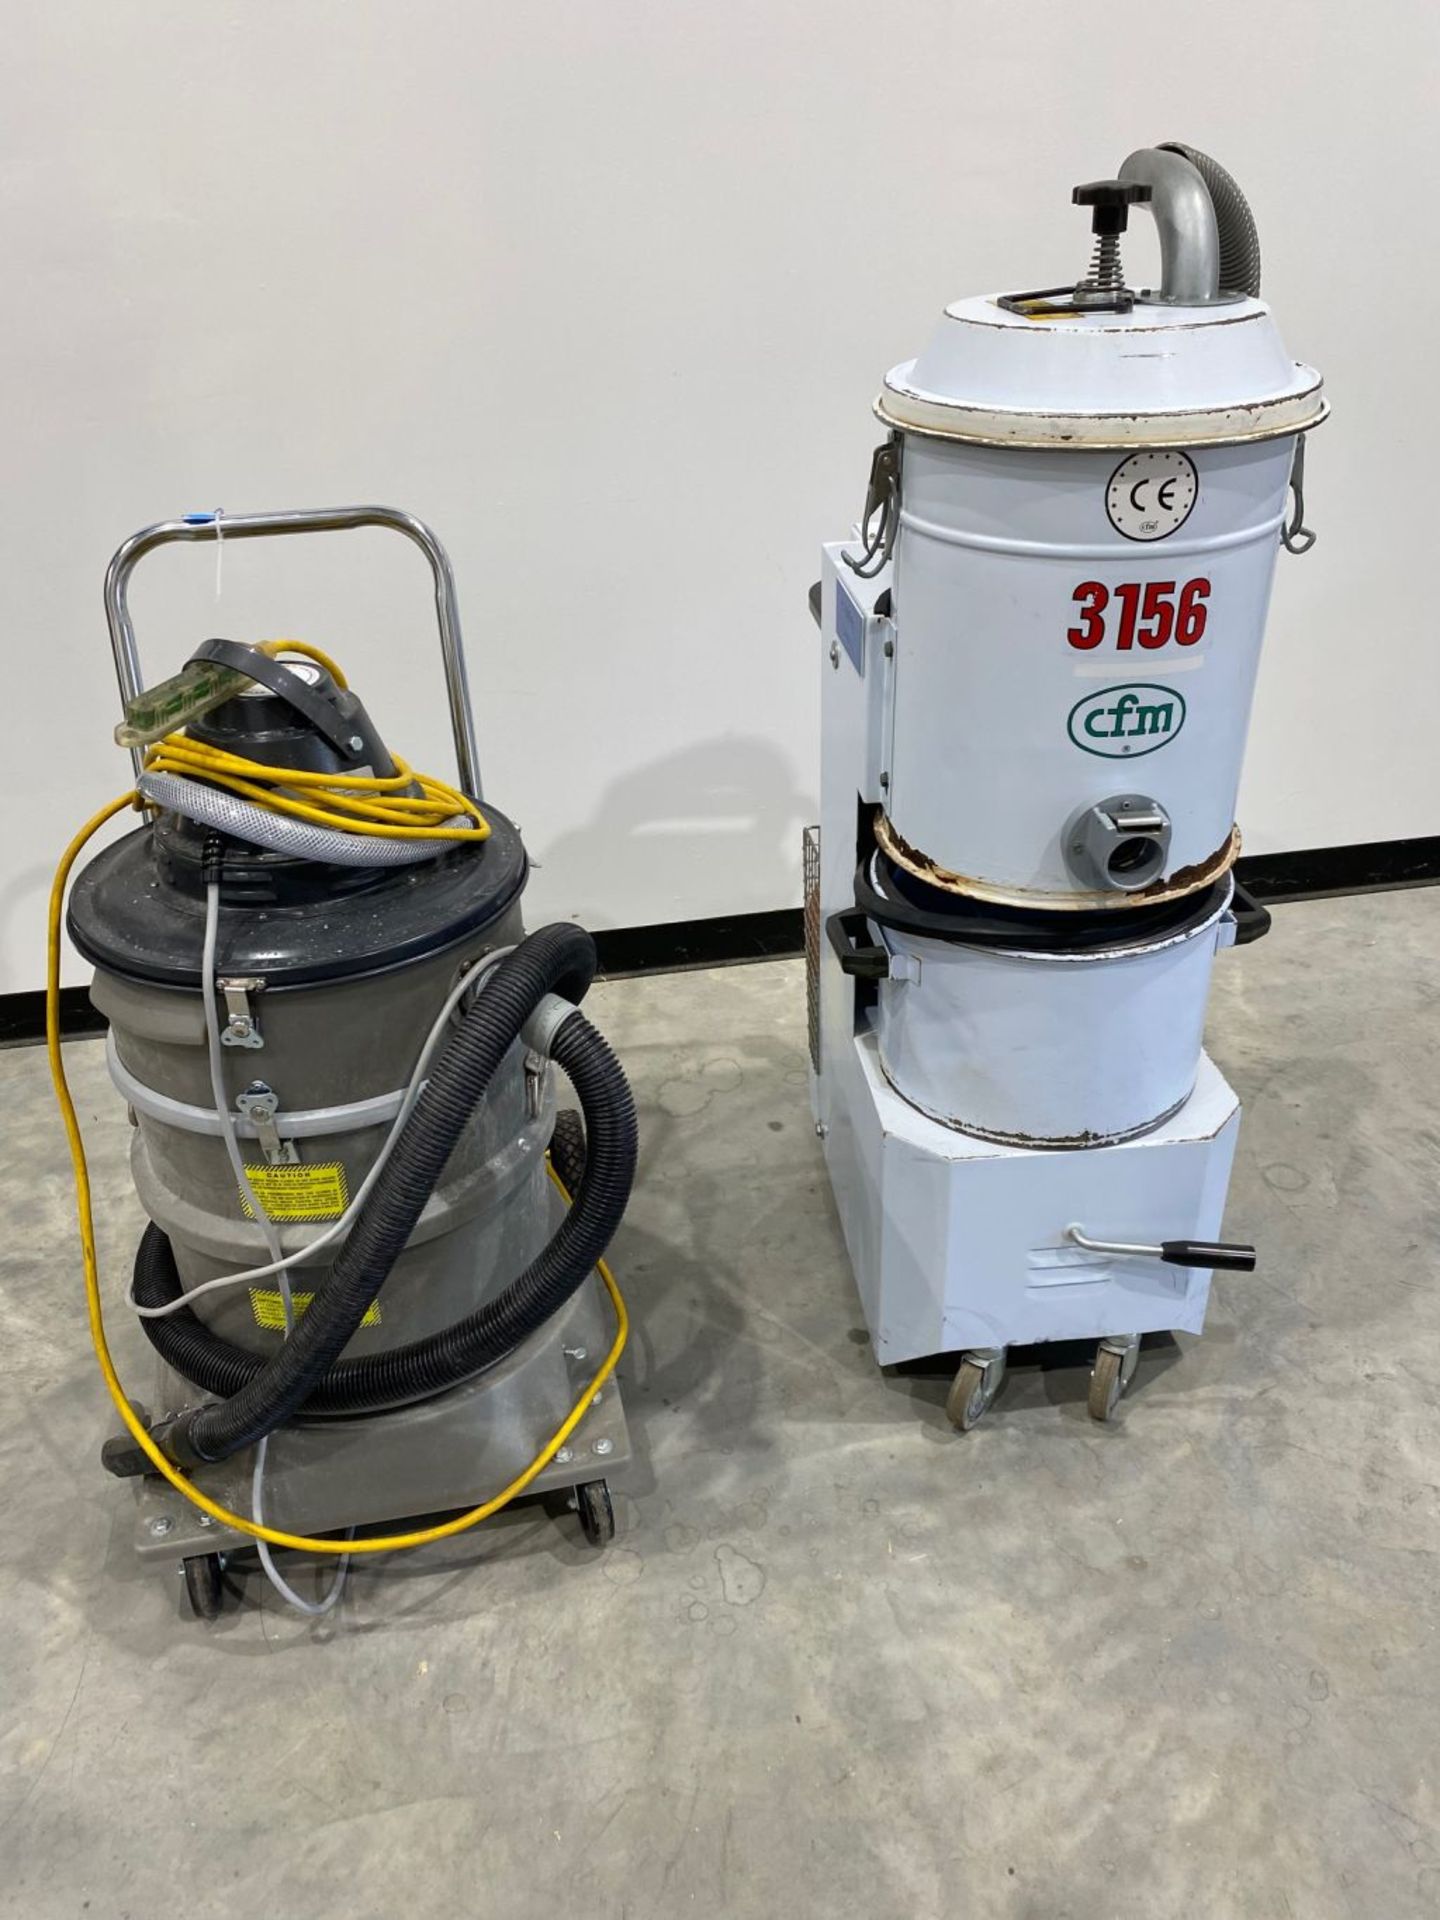 Vacuum Cleaners - Qty 2. As shown in photos (Located Central New York, NY)